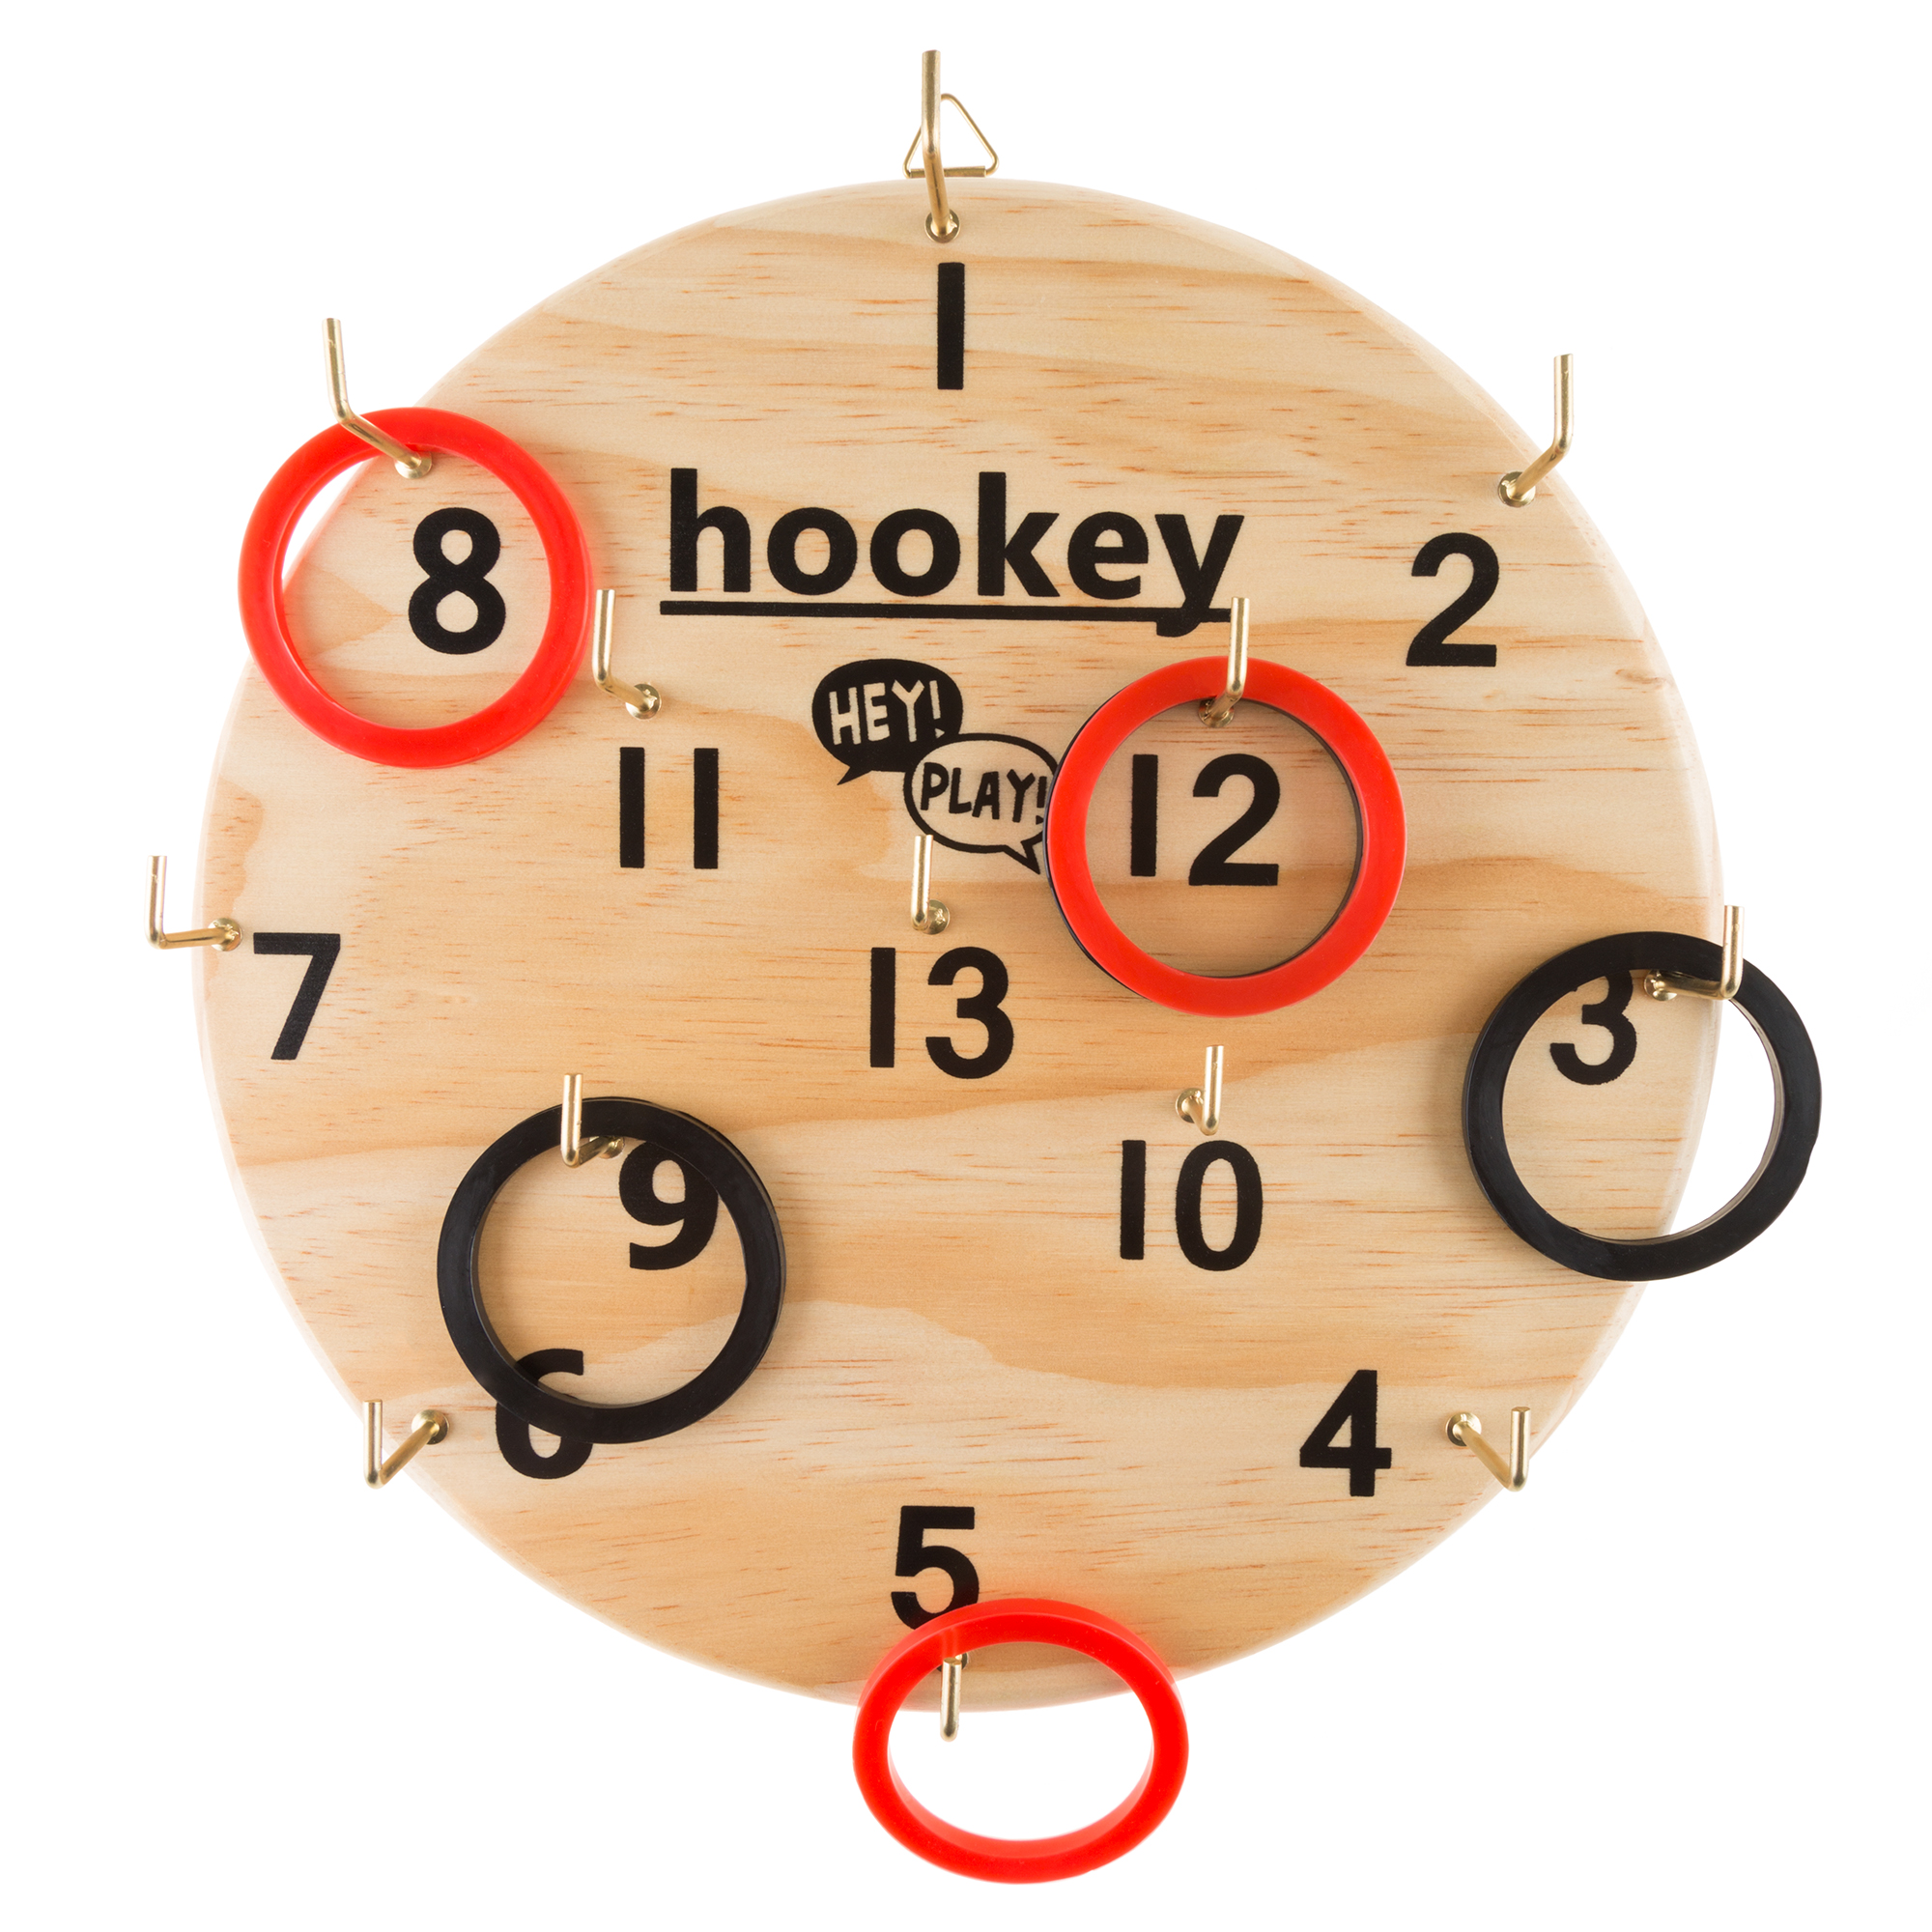 Hey! Play! Hookey Ring Target Toss Game - image 1 of 4